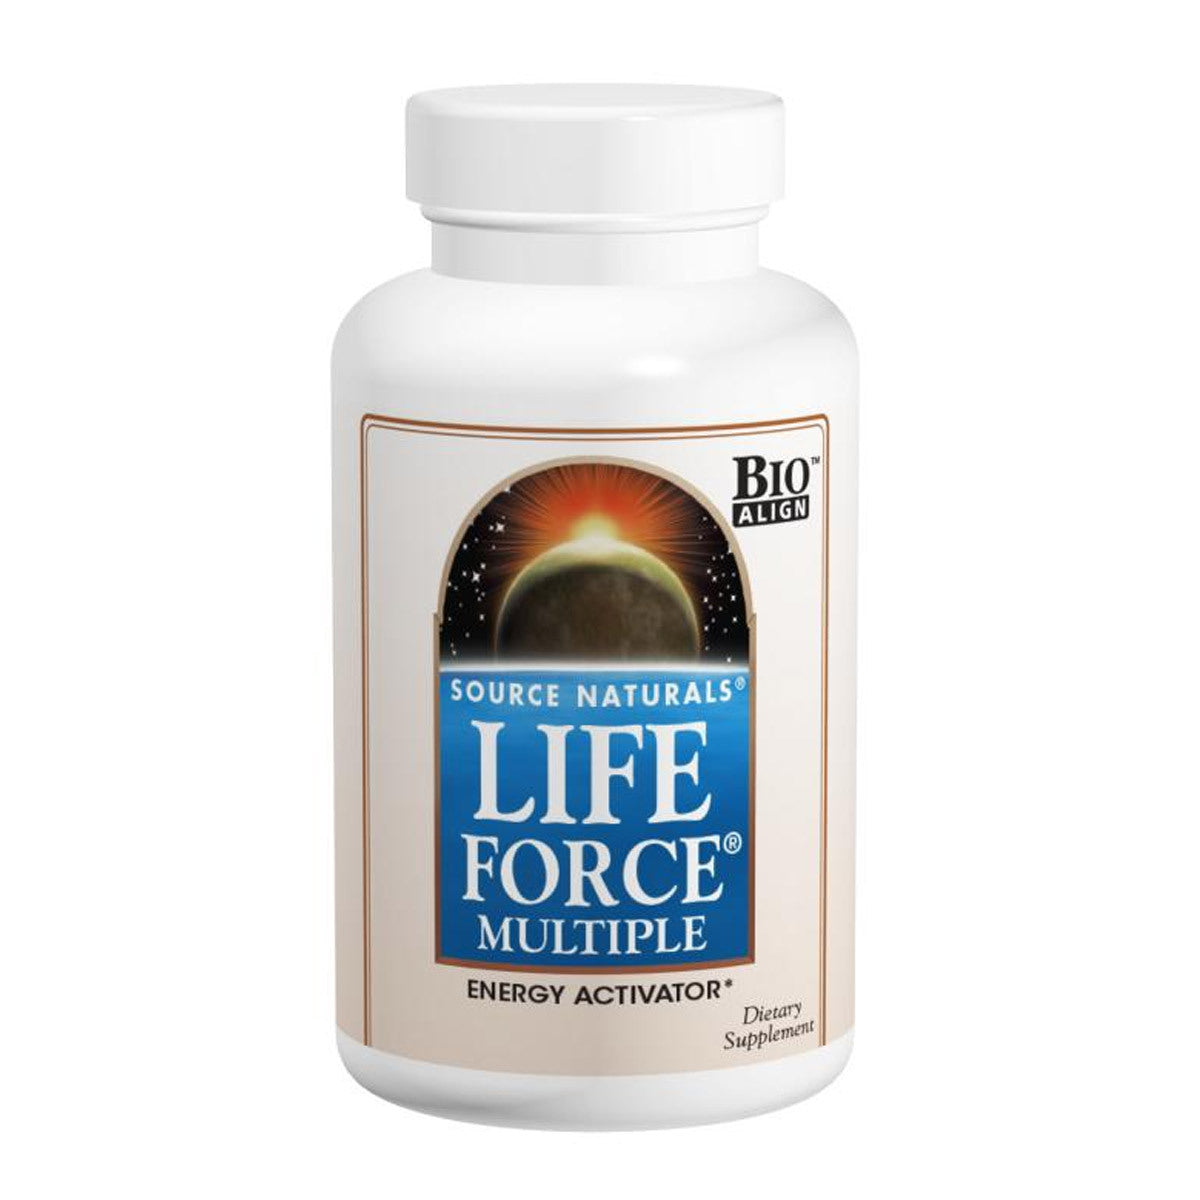 Primary image of Life Force Multivitamin